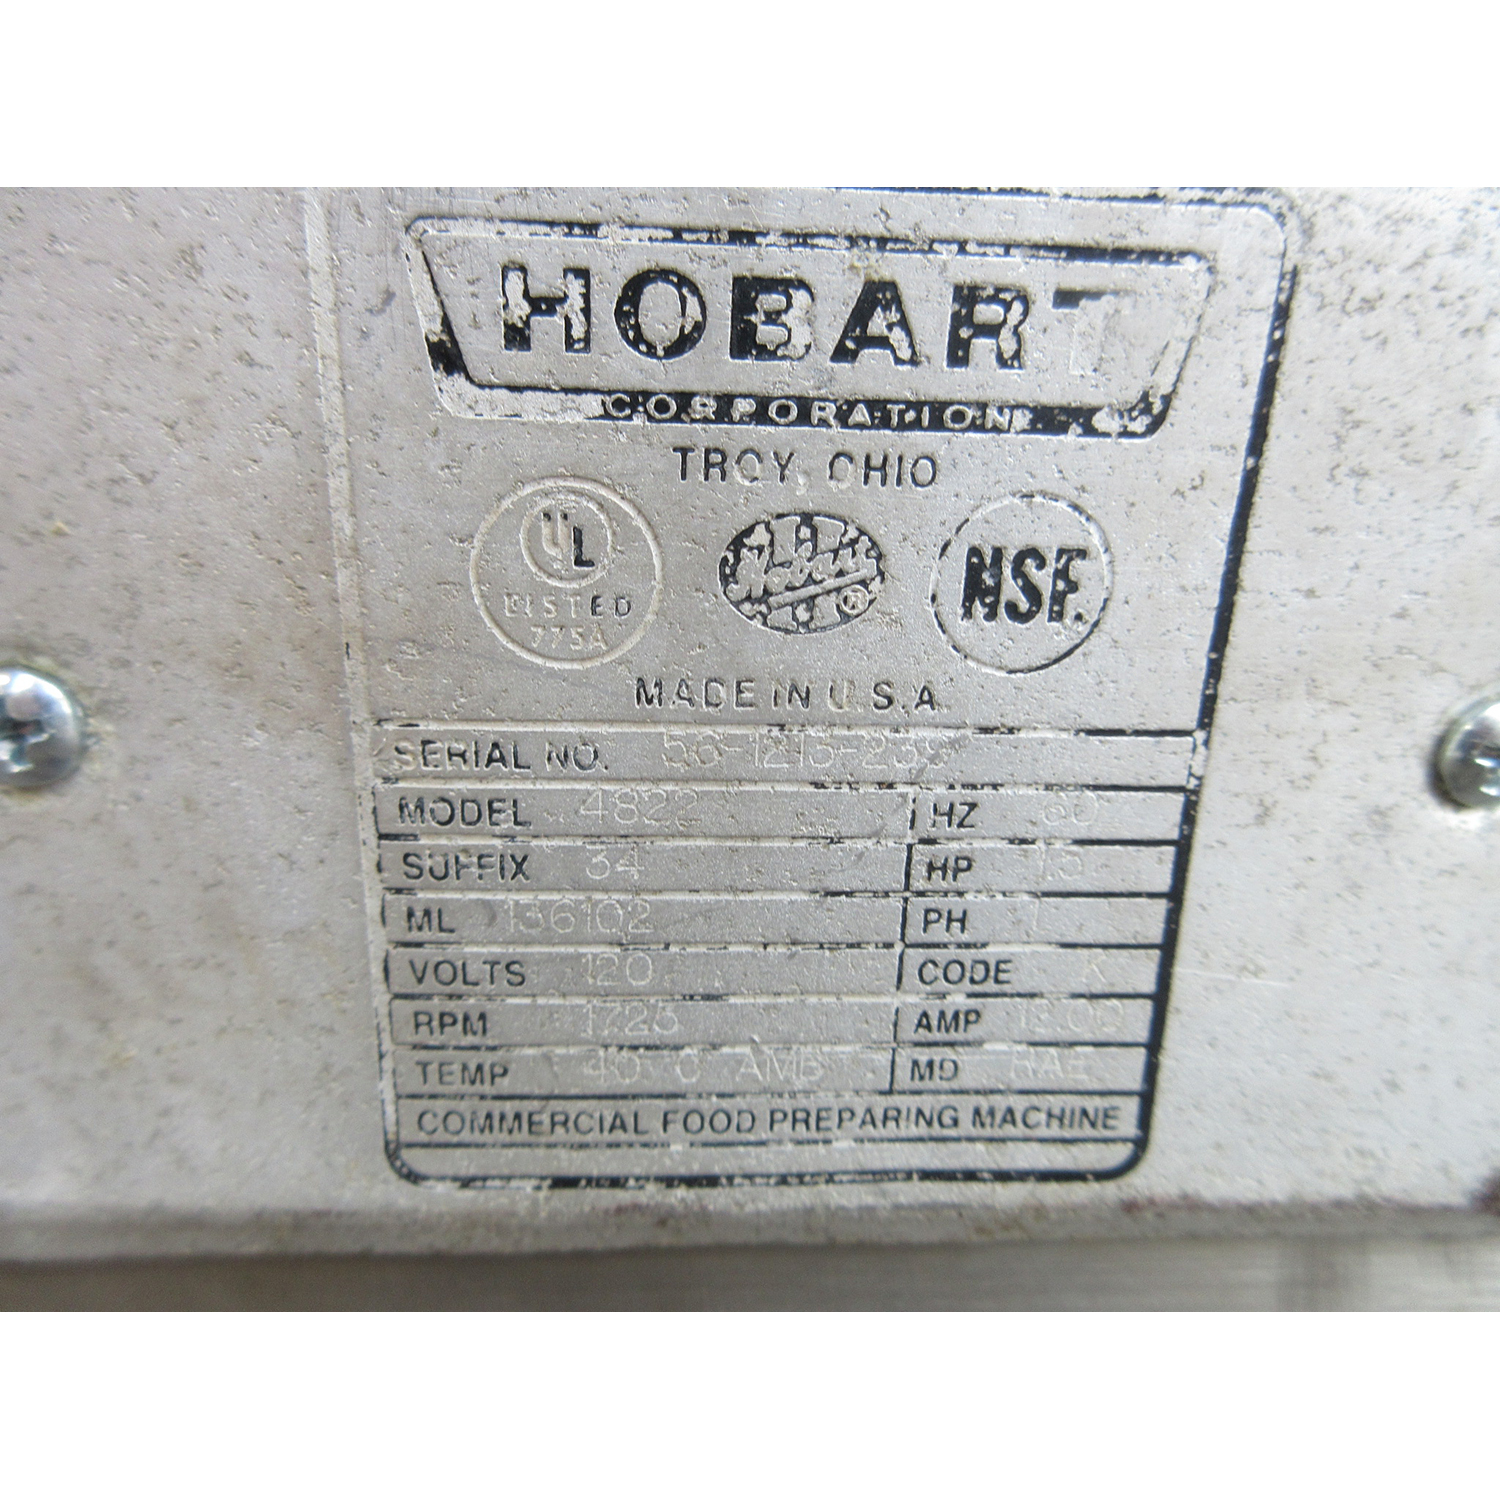 Hobart 4822 Meat Grinder, Used Excellent Condition image 3